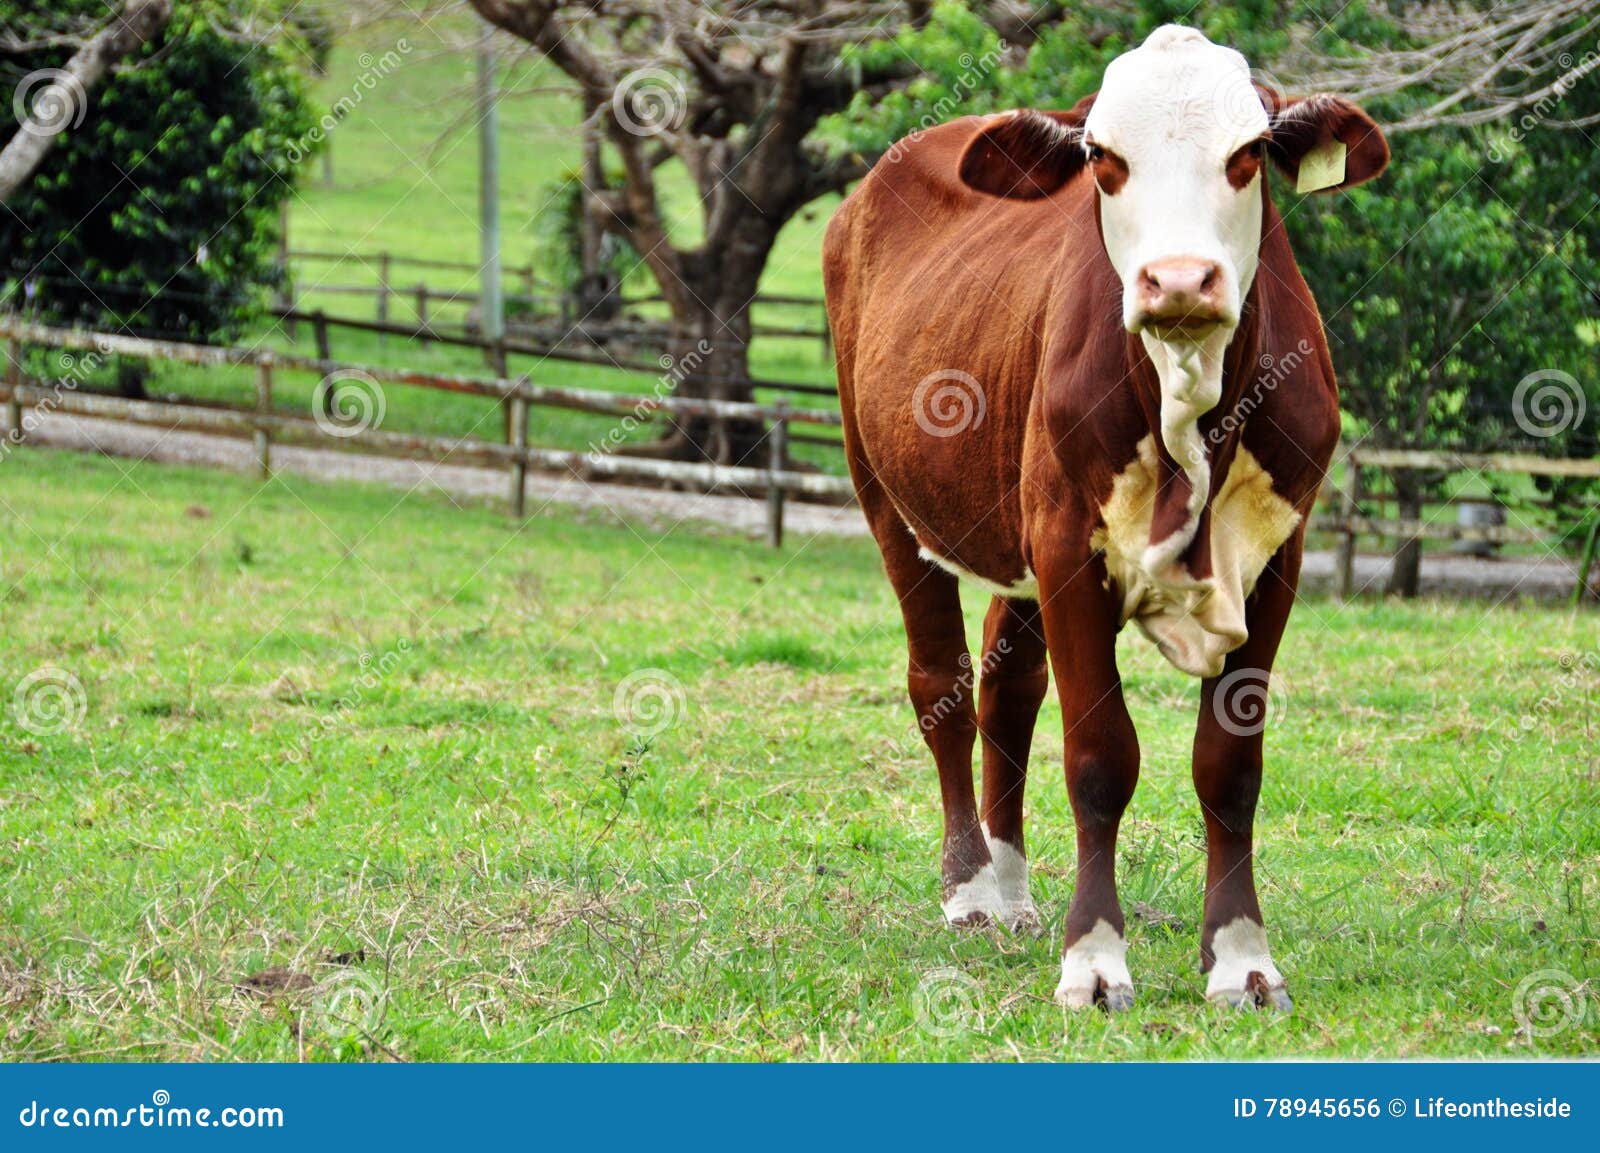 young red and white australian hereford heifer cow in paddock